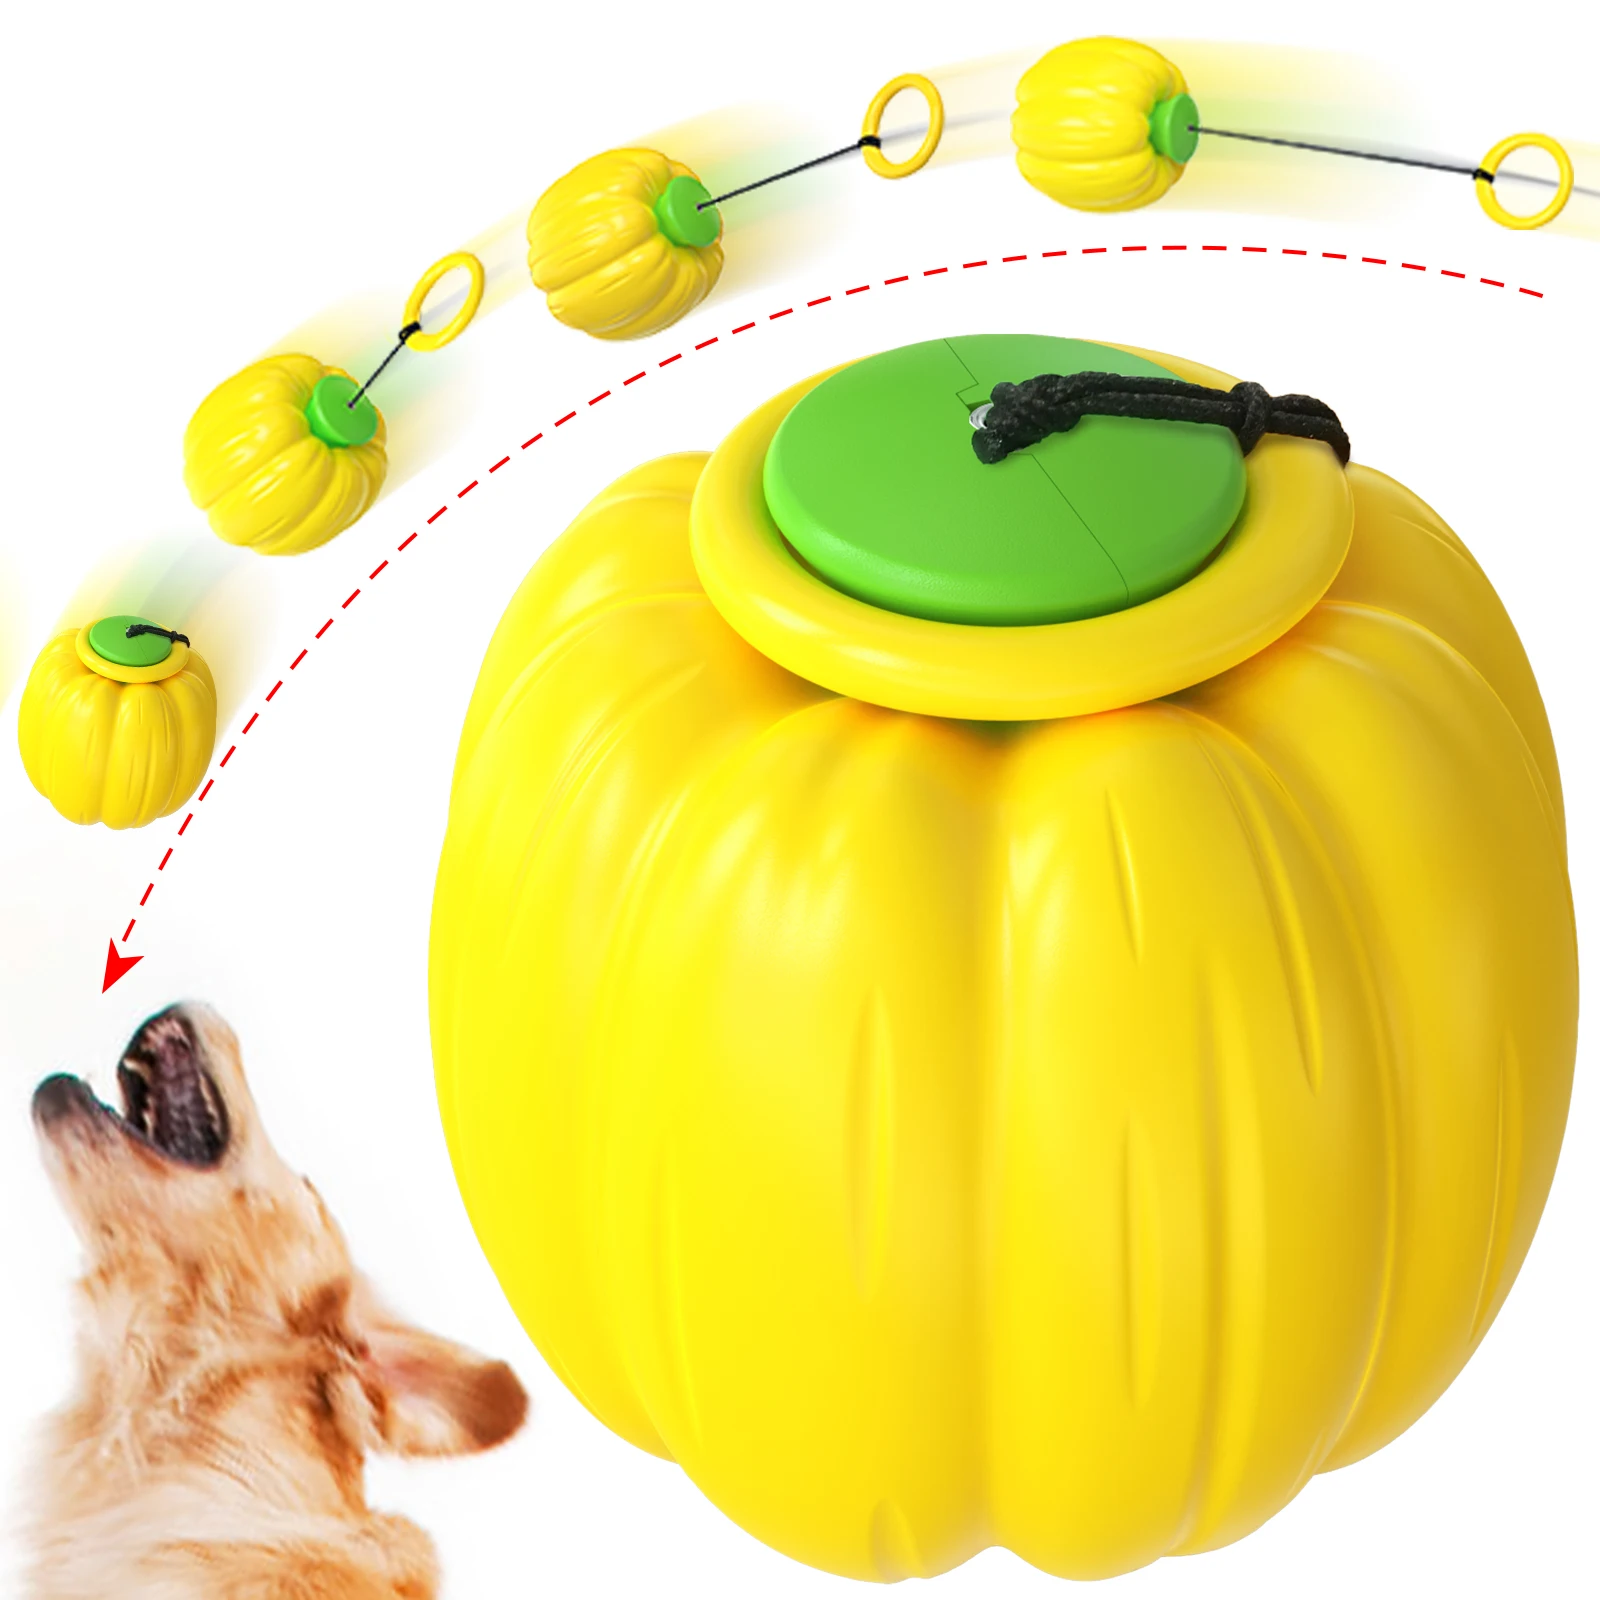 Pet supplies dog training molar ball gnawing pumpkin ball outdoor hand throwing toy ball interactive toy